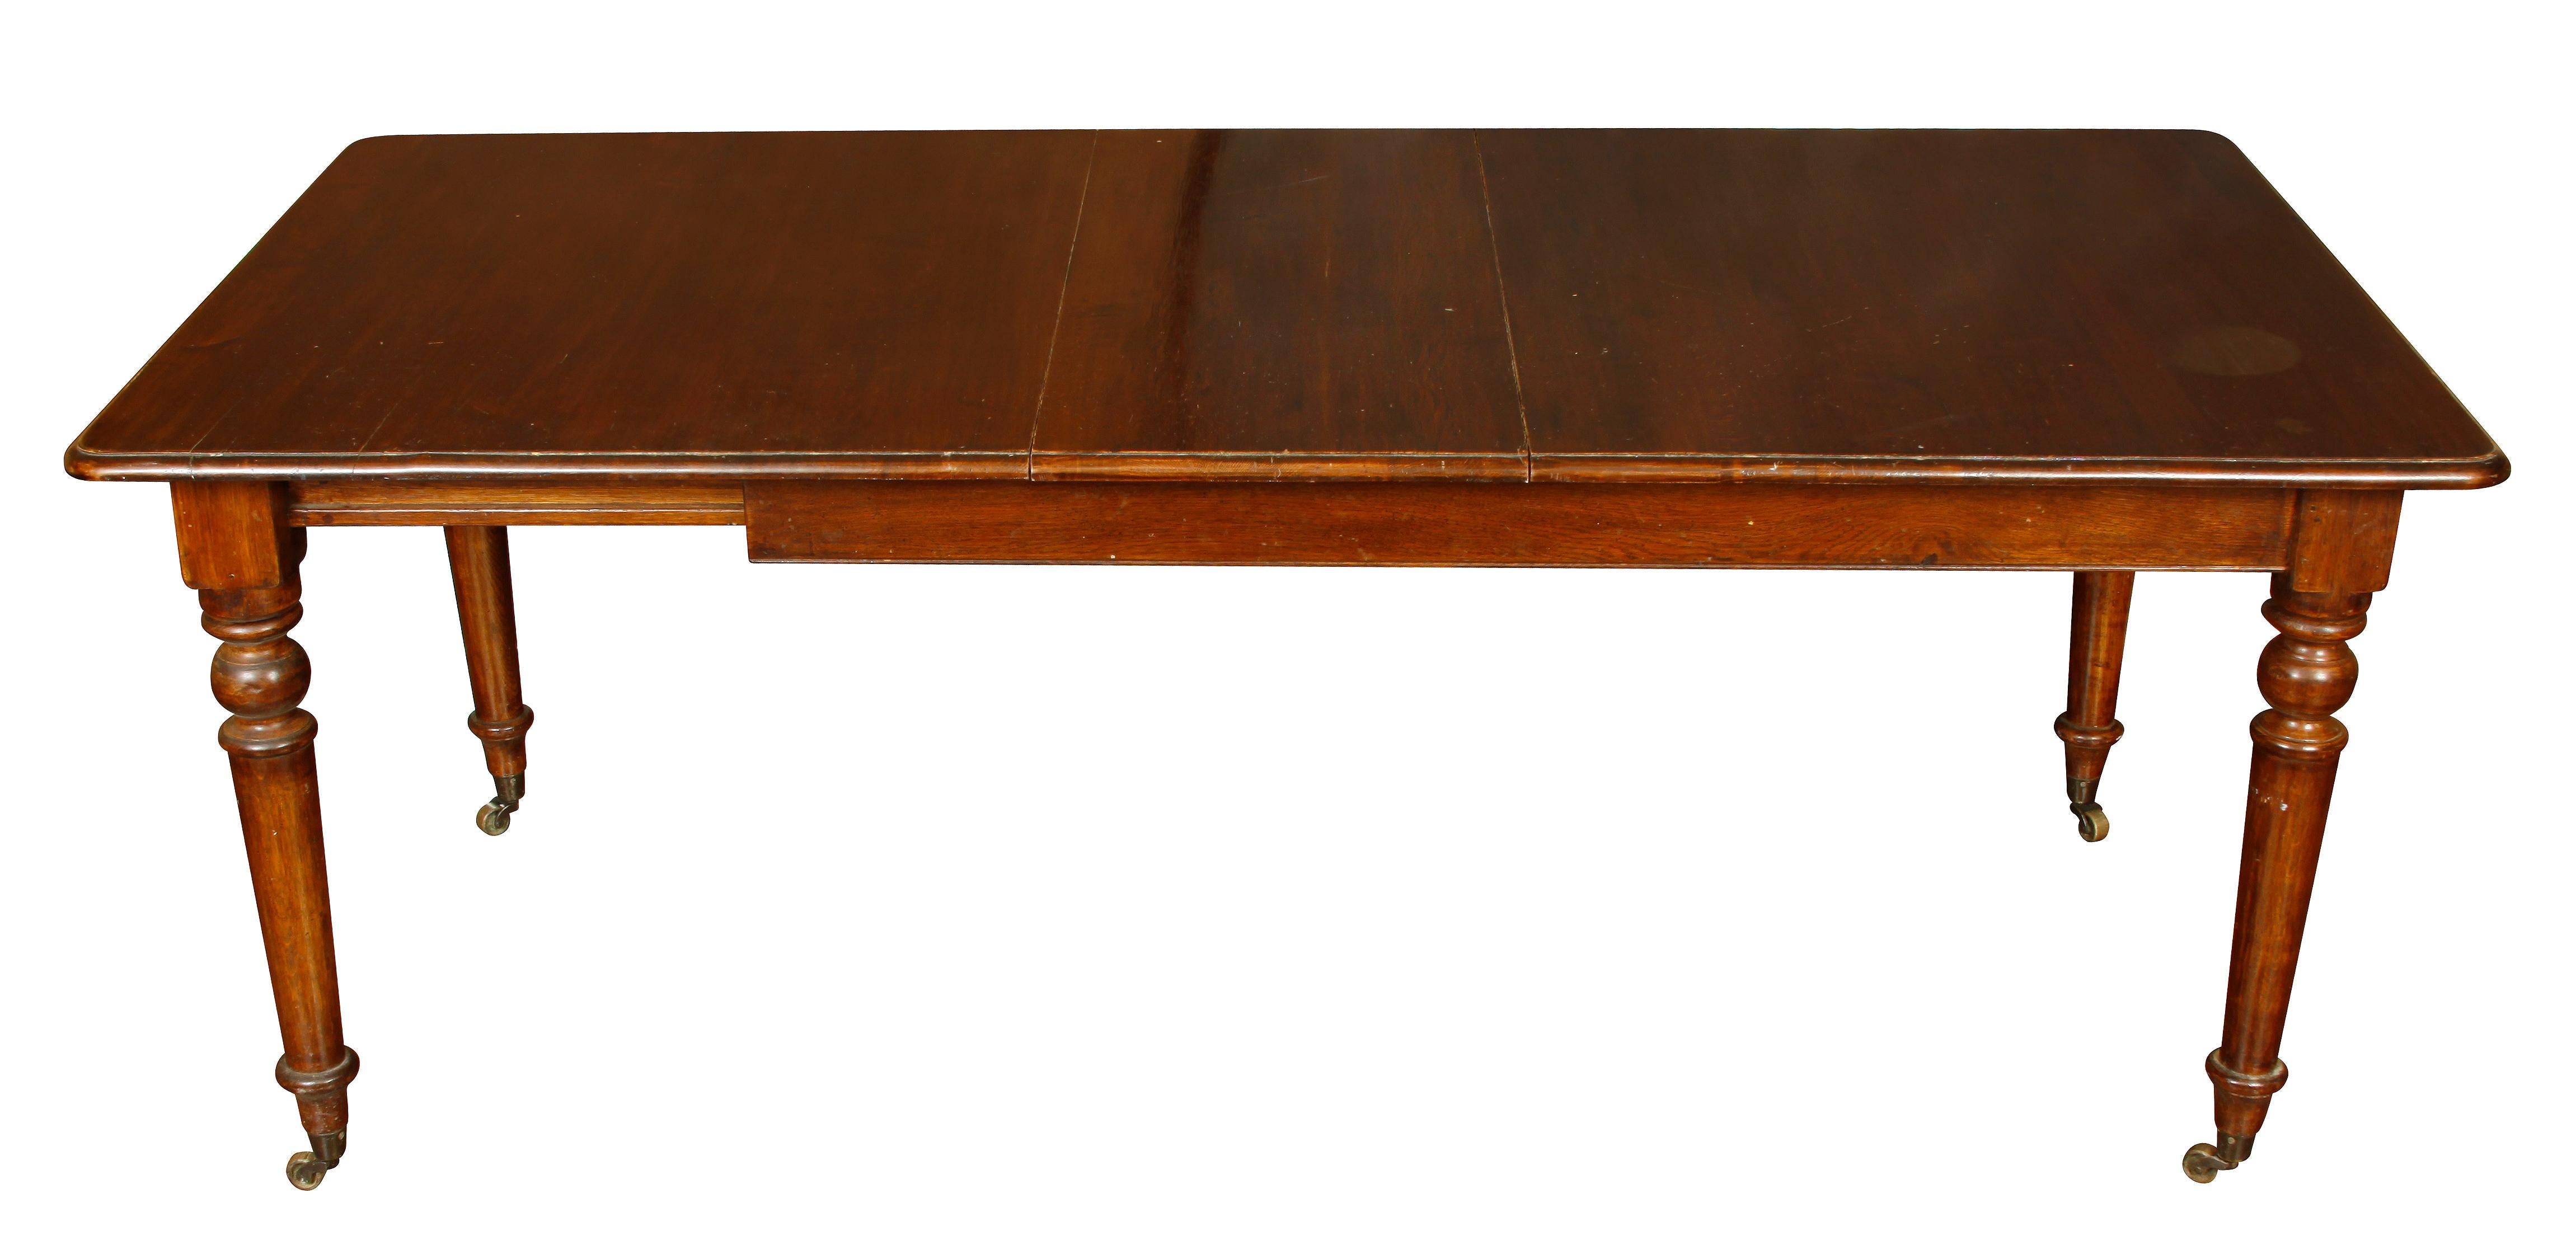 20th Century Vintage English Dining Table with One Leaf